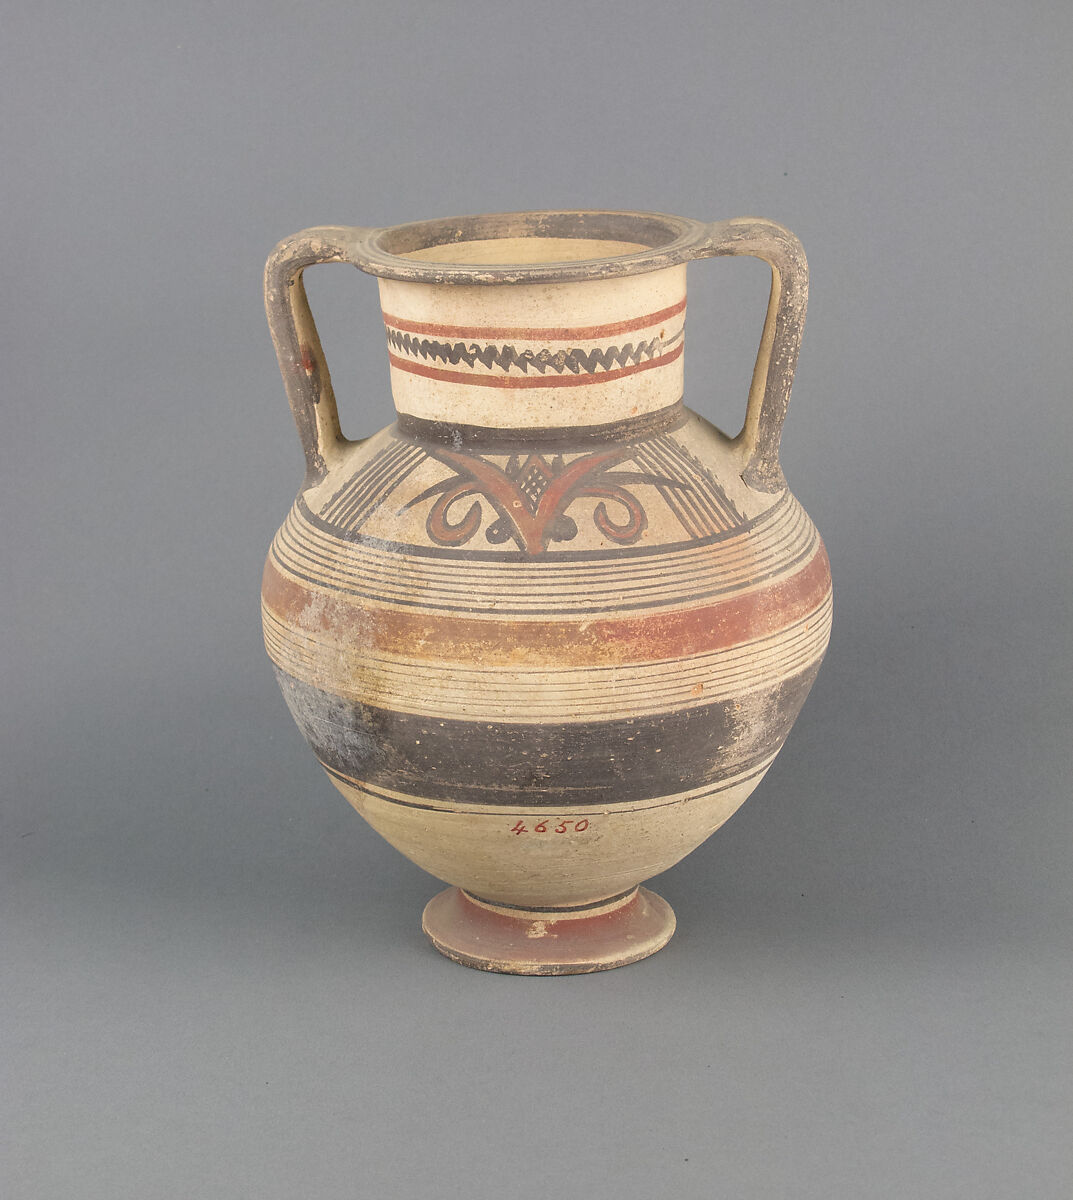 Krater, Terracotta, Cypriot 